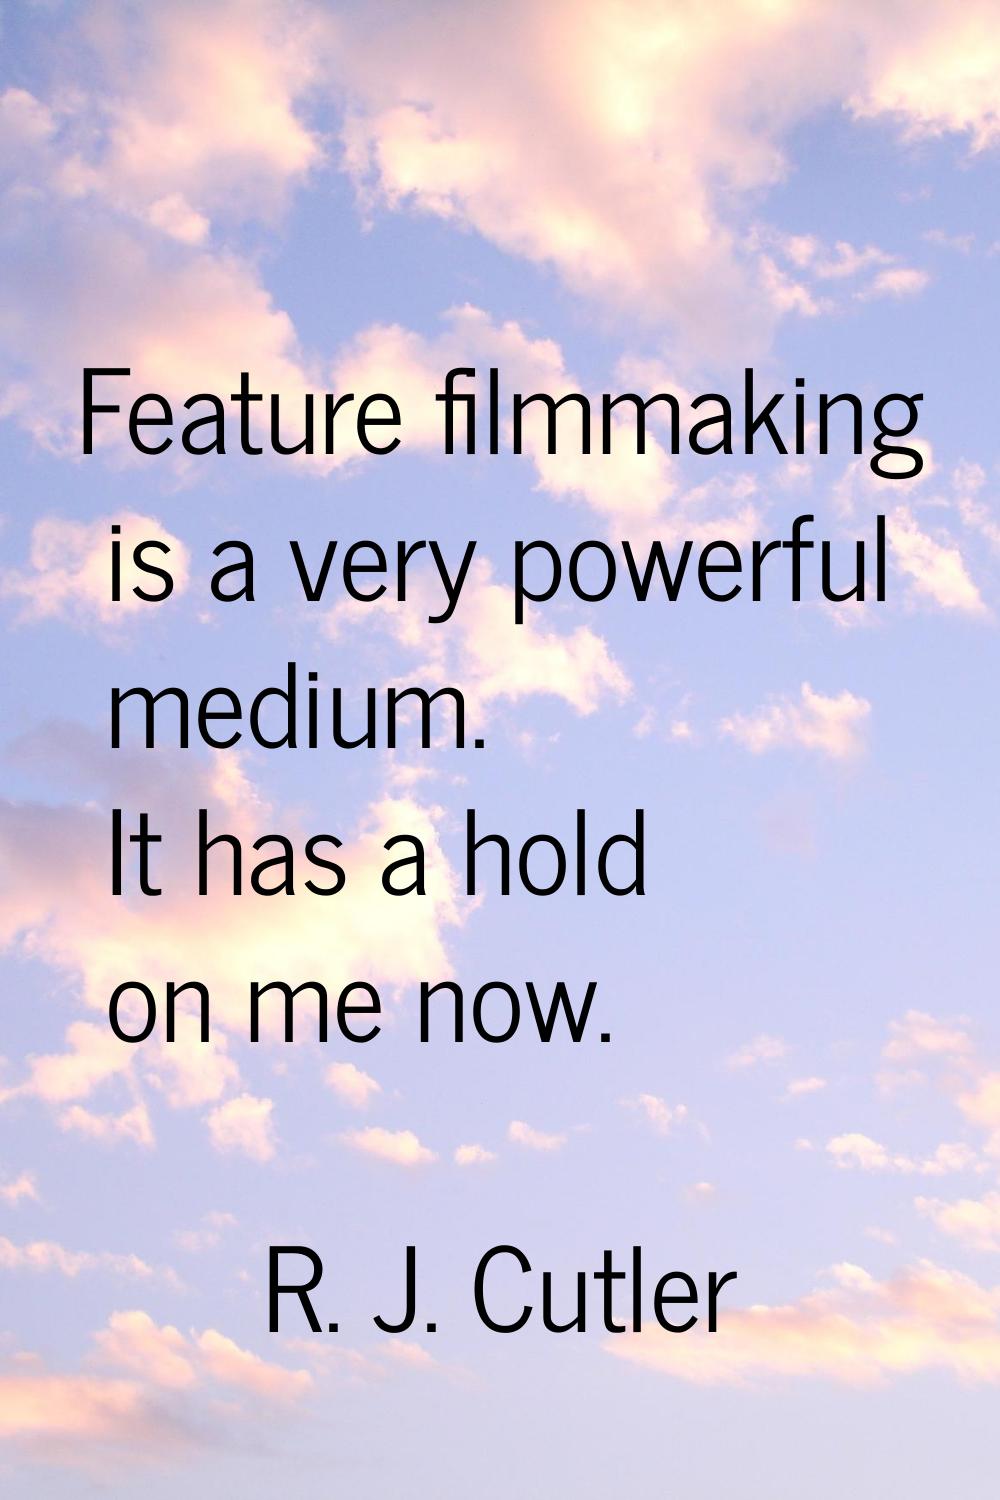 Feature filmmaking is a very powerful medium. It has a hold on me now.